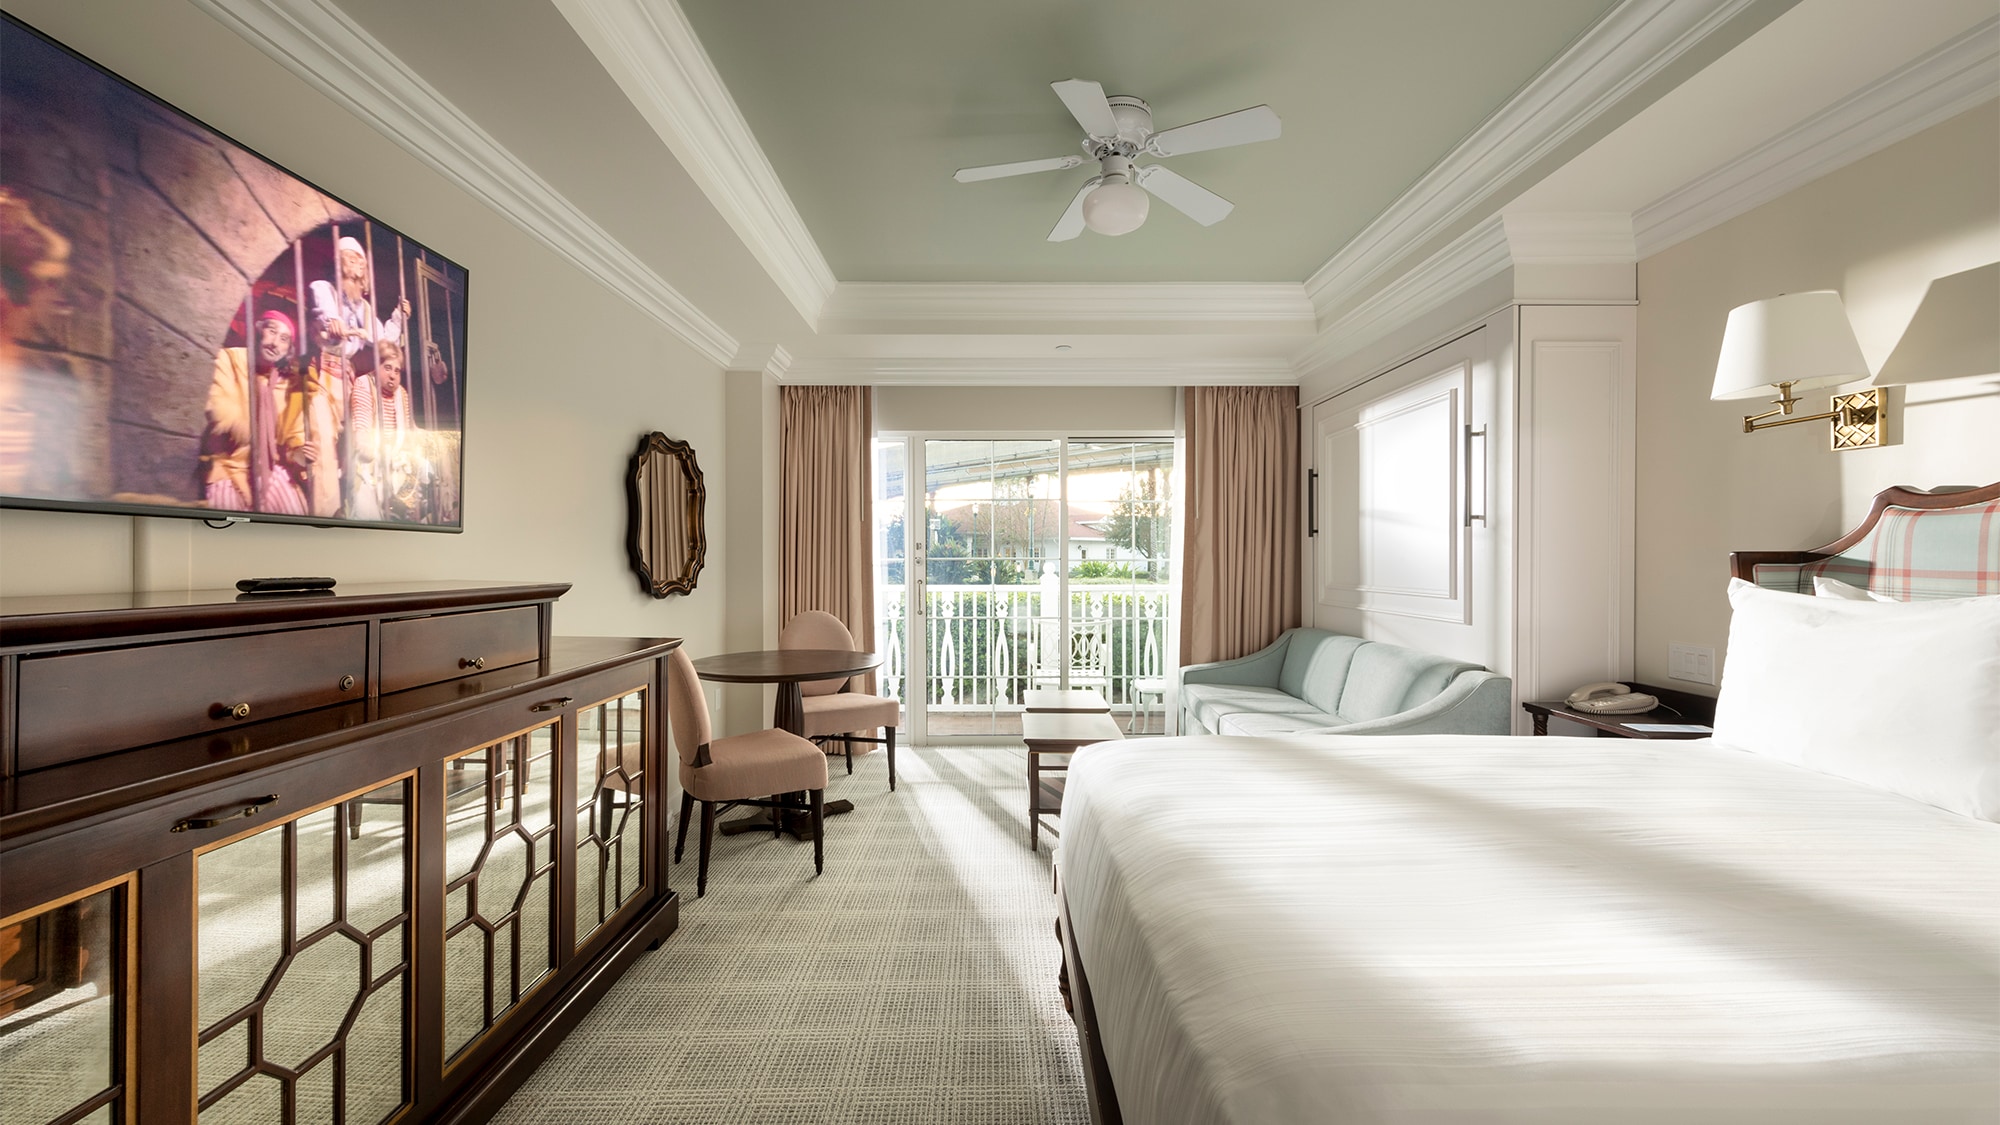 Rooms And Points The Villas At Disneys Grand Floridian Resort And Spa Disney Vacation Club